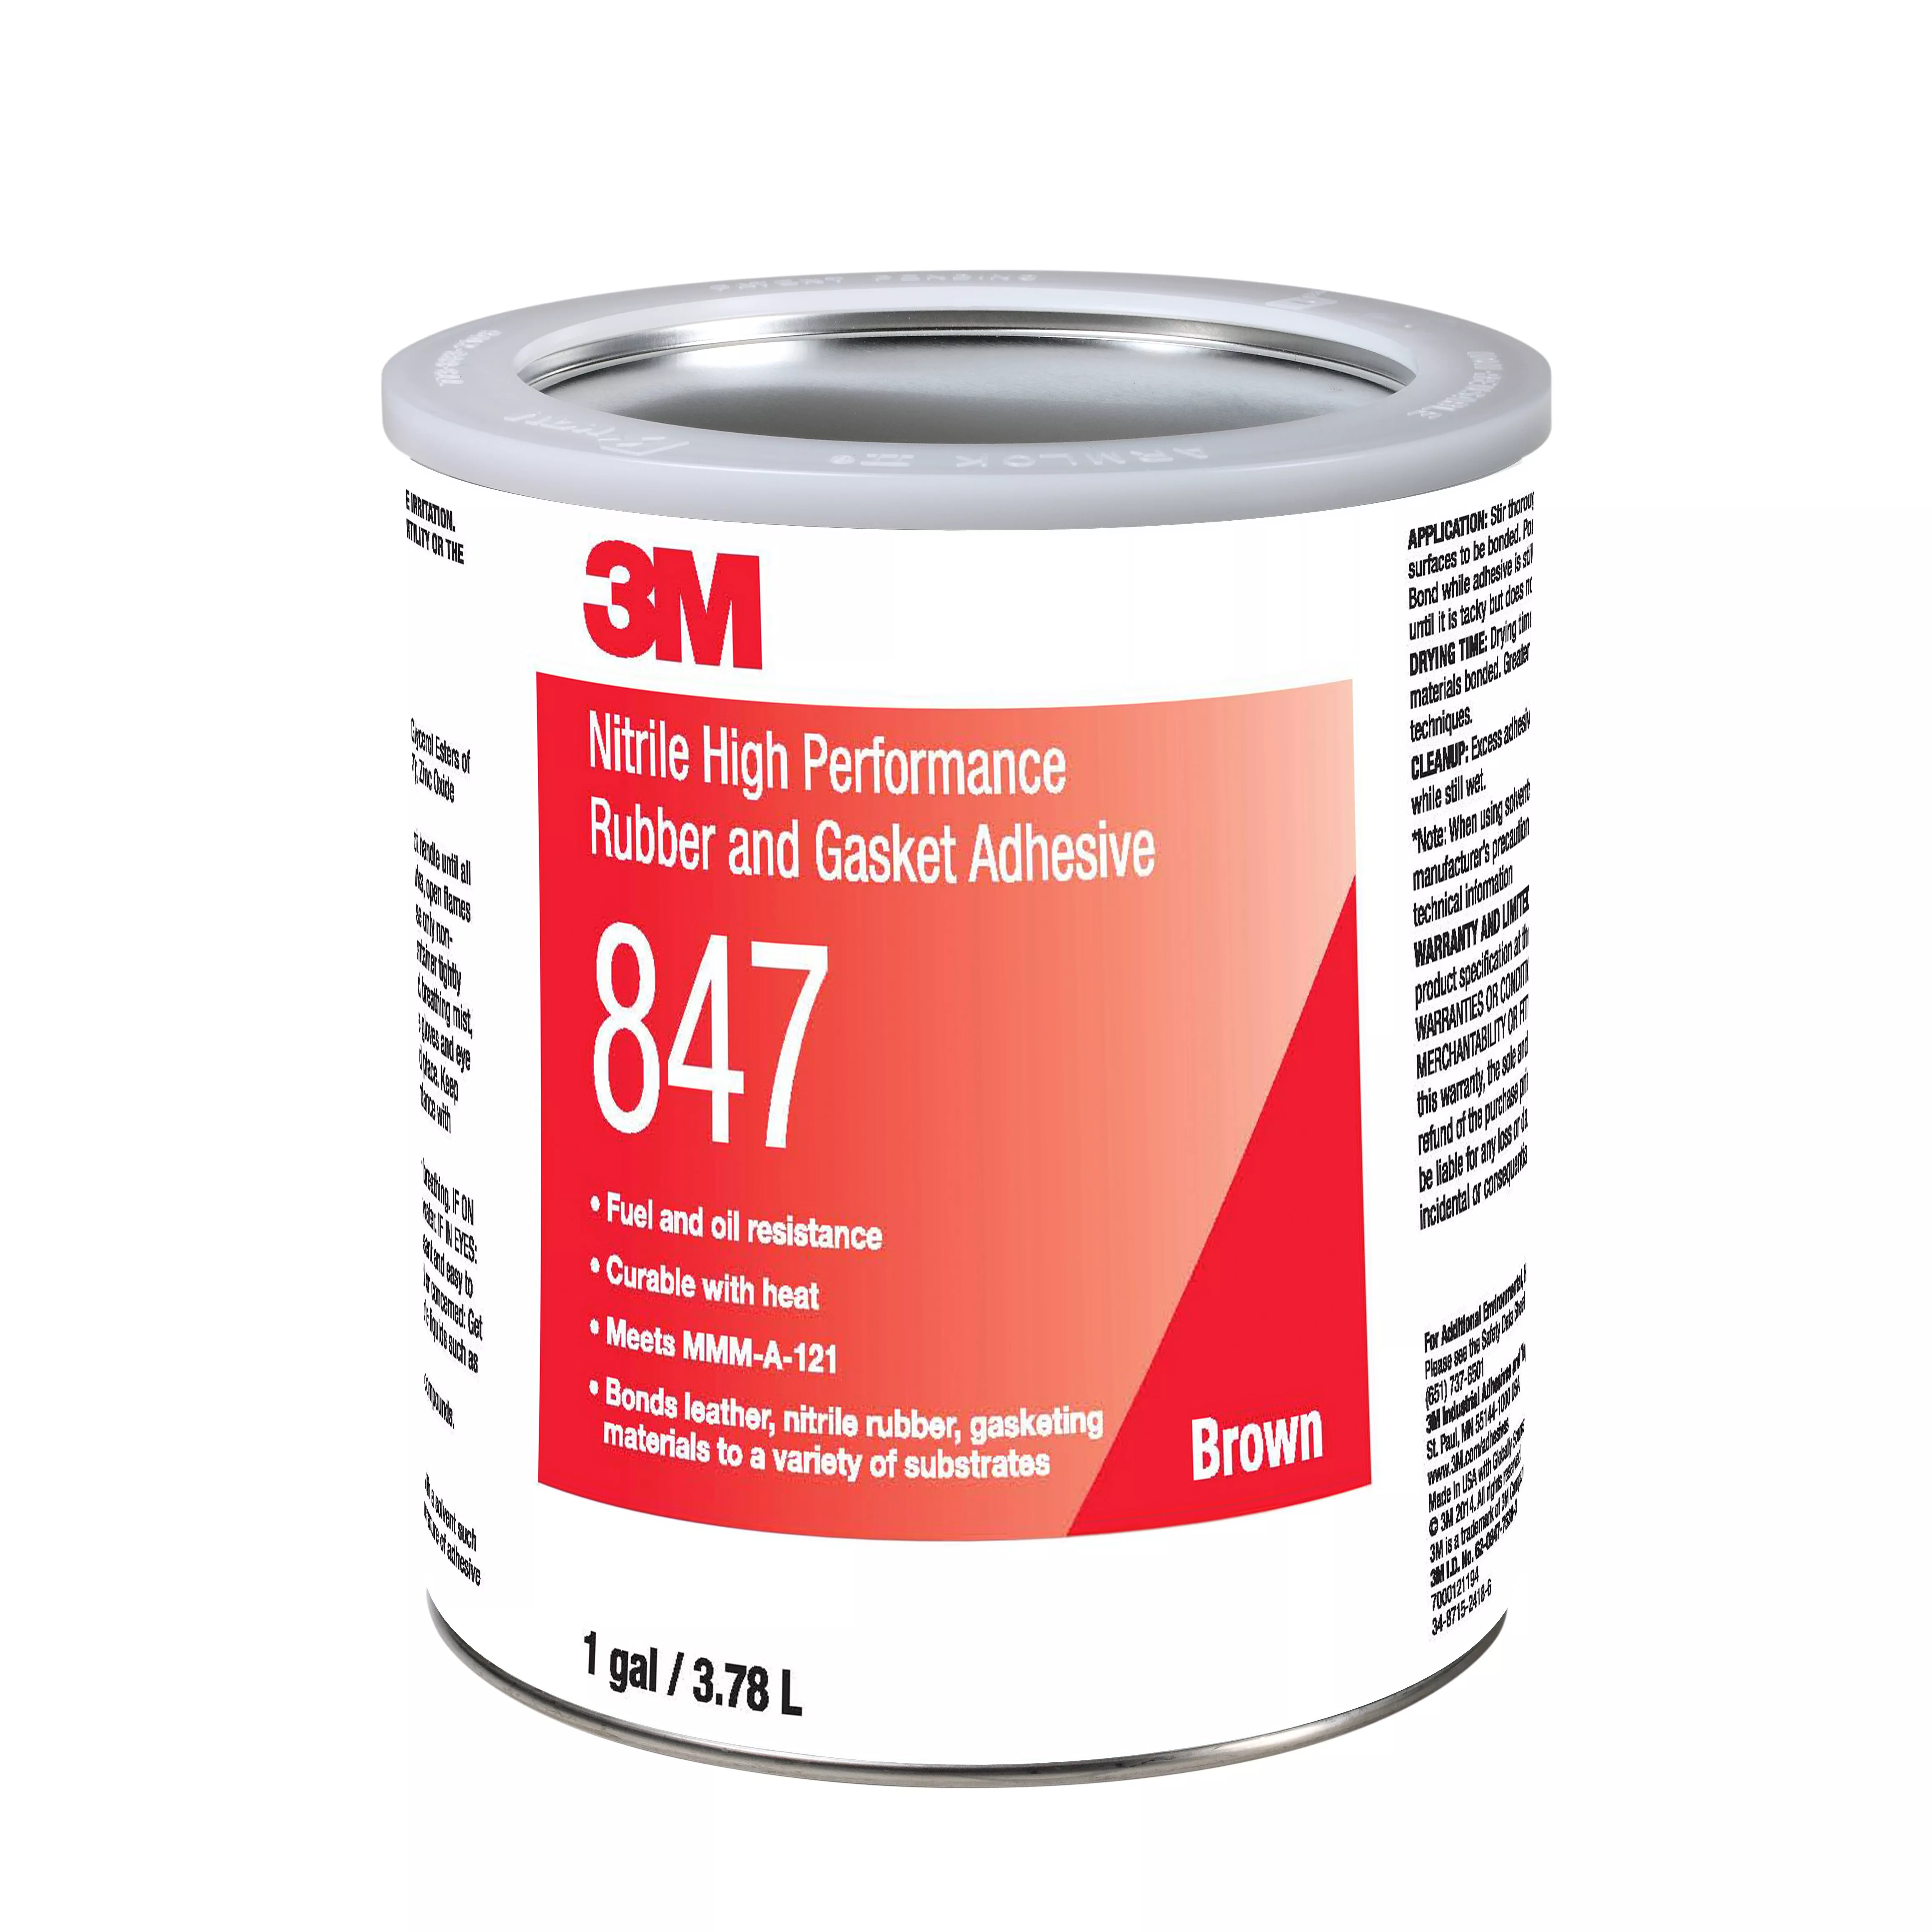 3M™ Nitrile High Performance Rubber and Gasket Adhesive 847, Brown, 1
Gallon, 4 Can/Case